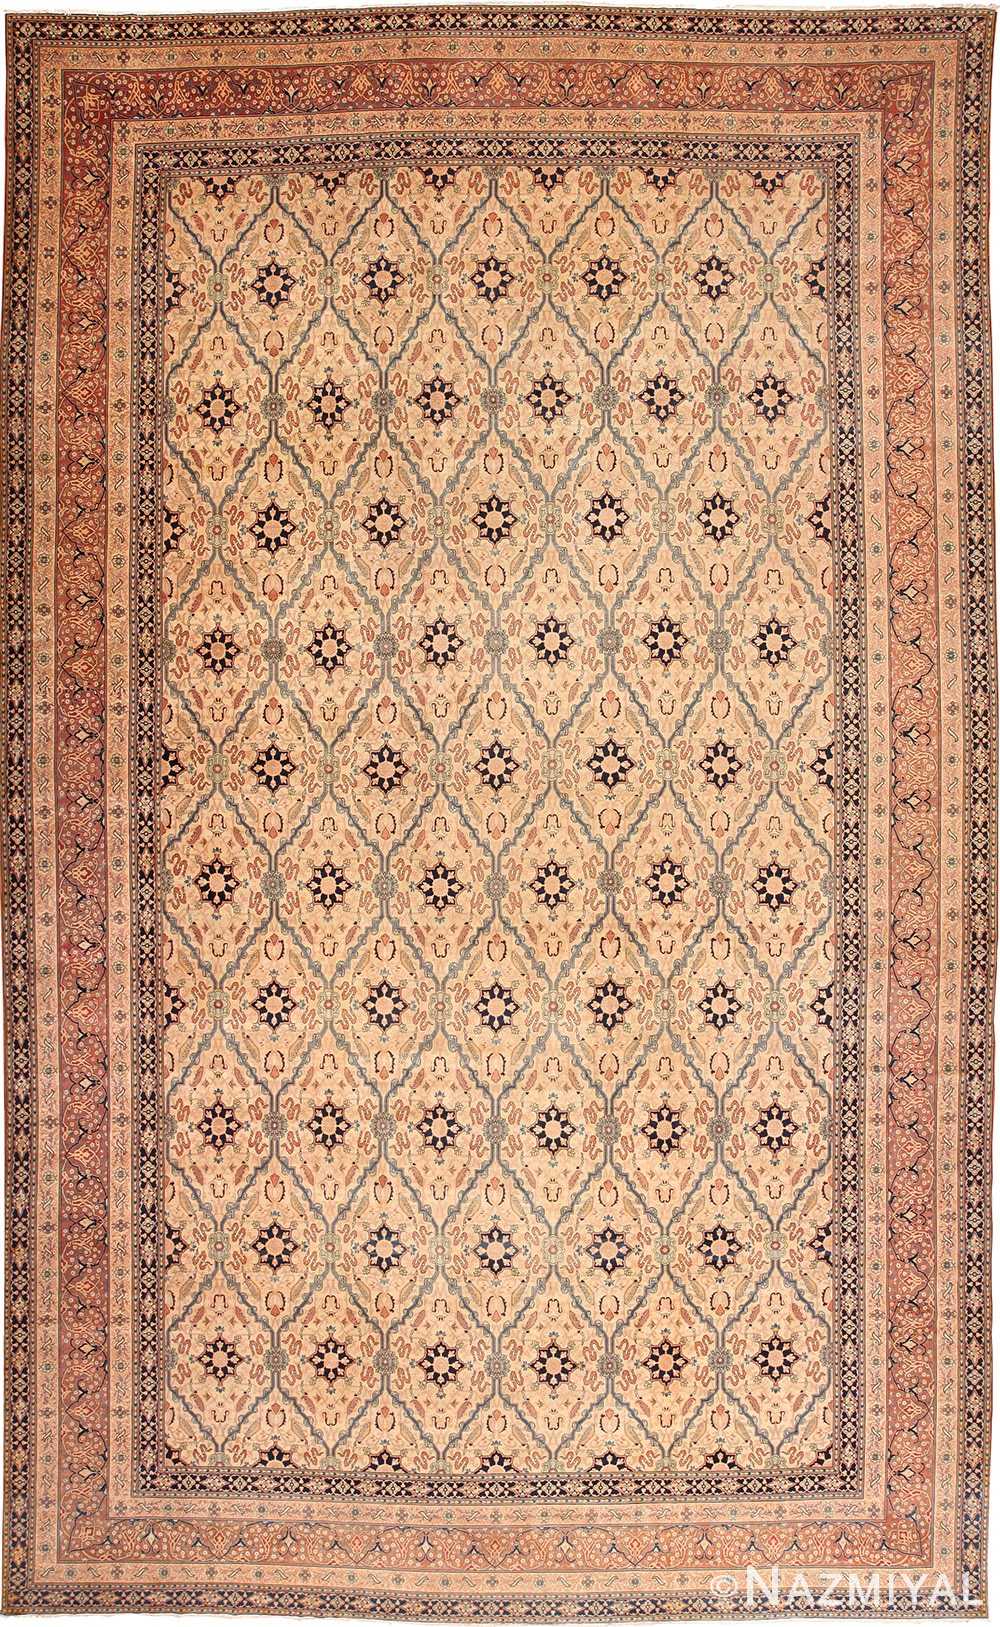 Full view oversized Antique Tabriz Persian rug 49297 by Nazmiyal